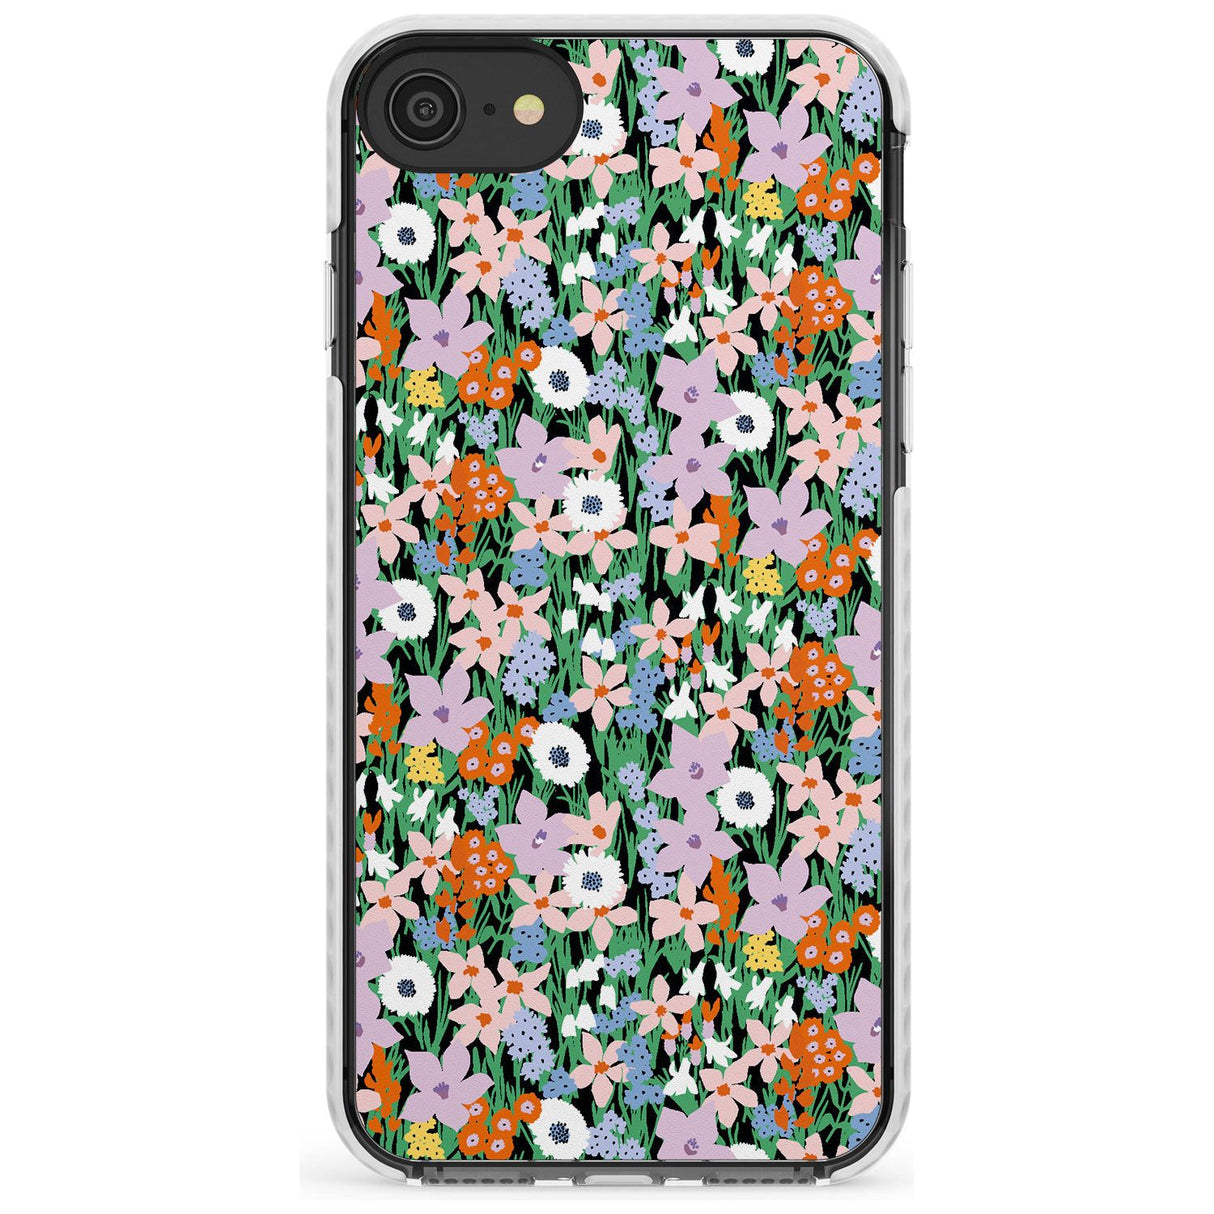 Jazzy Floral Mix: Solid Slim TPU Phone Case for iPhone SE 8 7 Plus